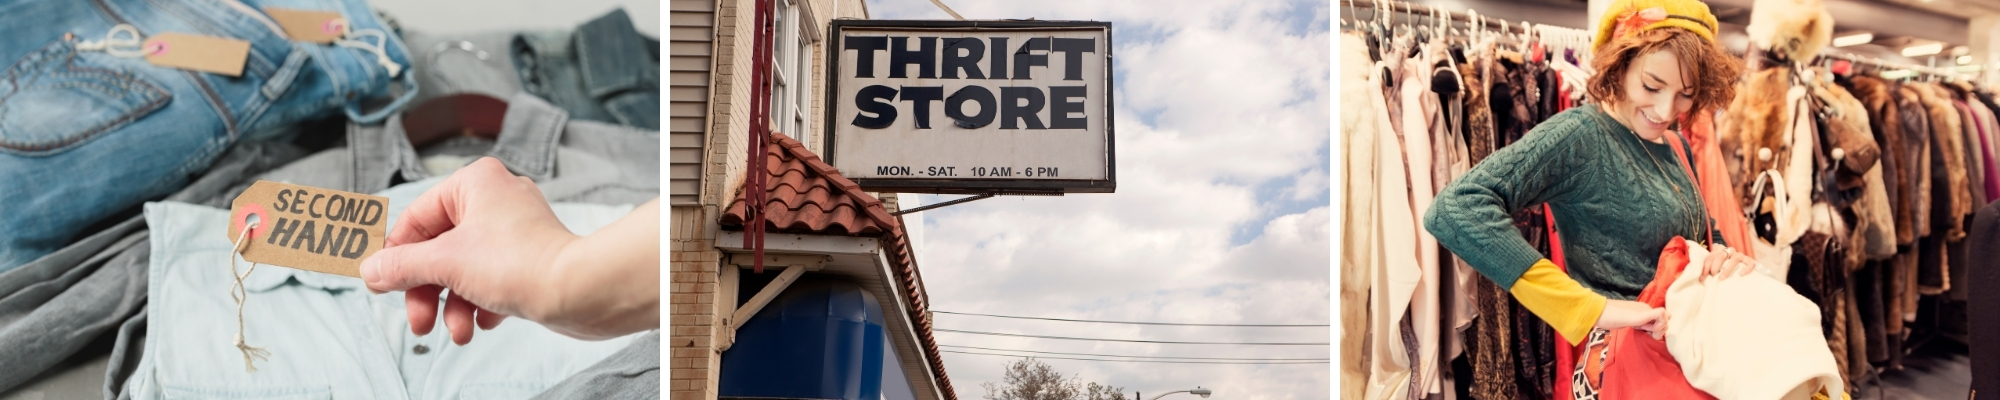 Business Loans for Thrift Stores